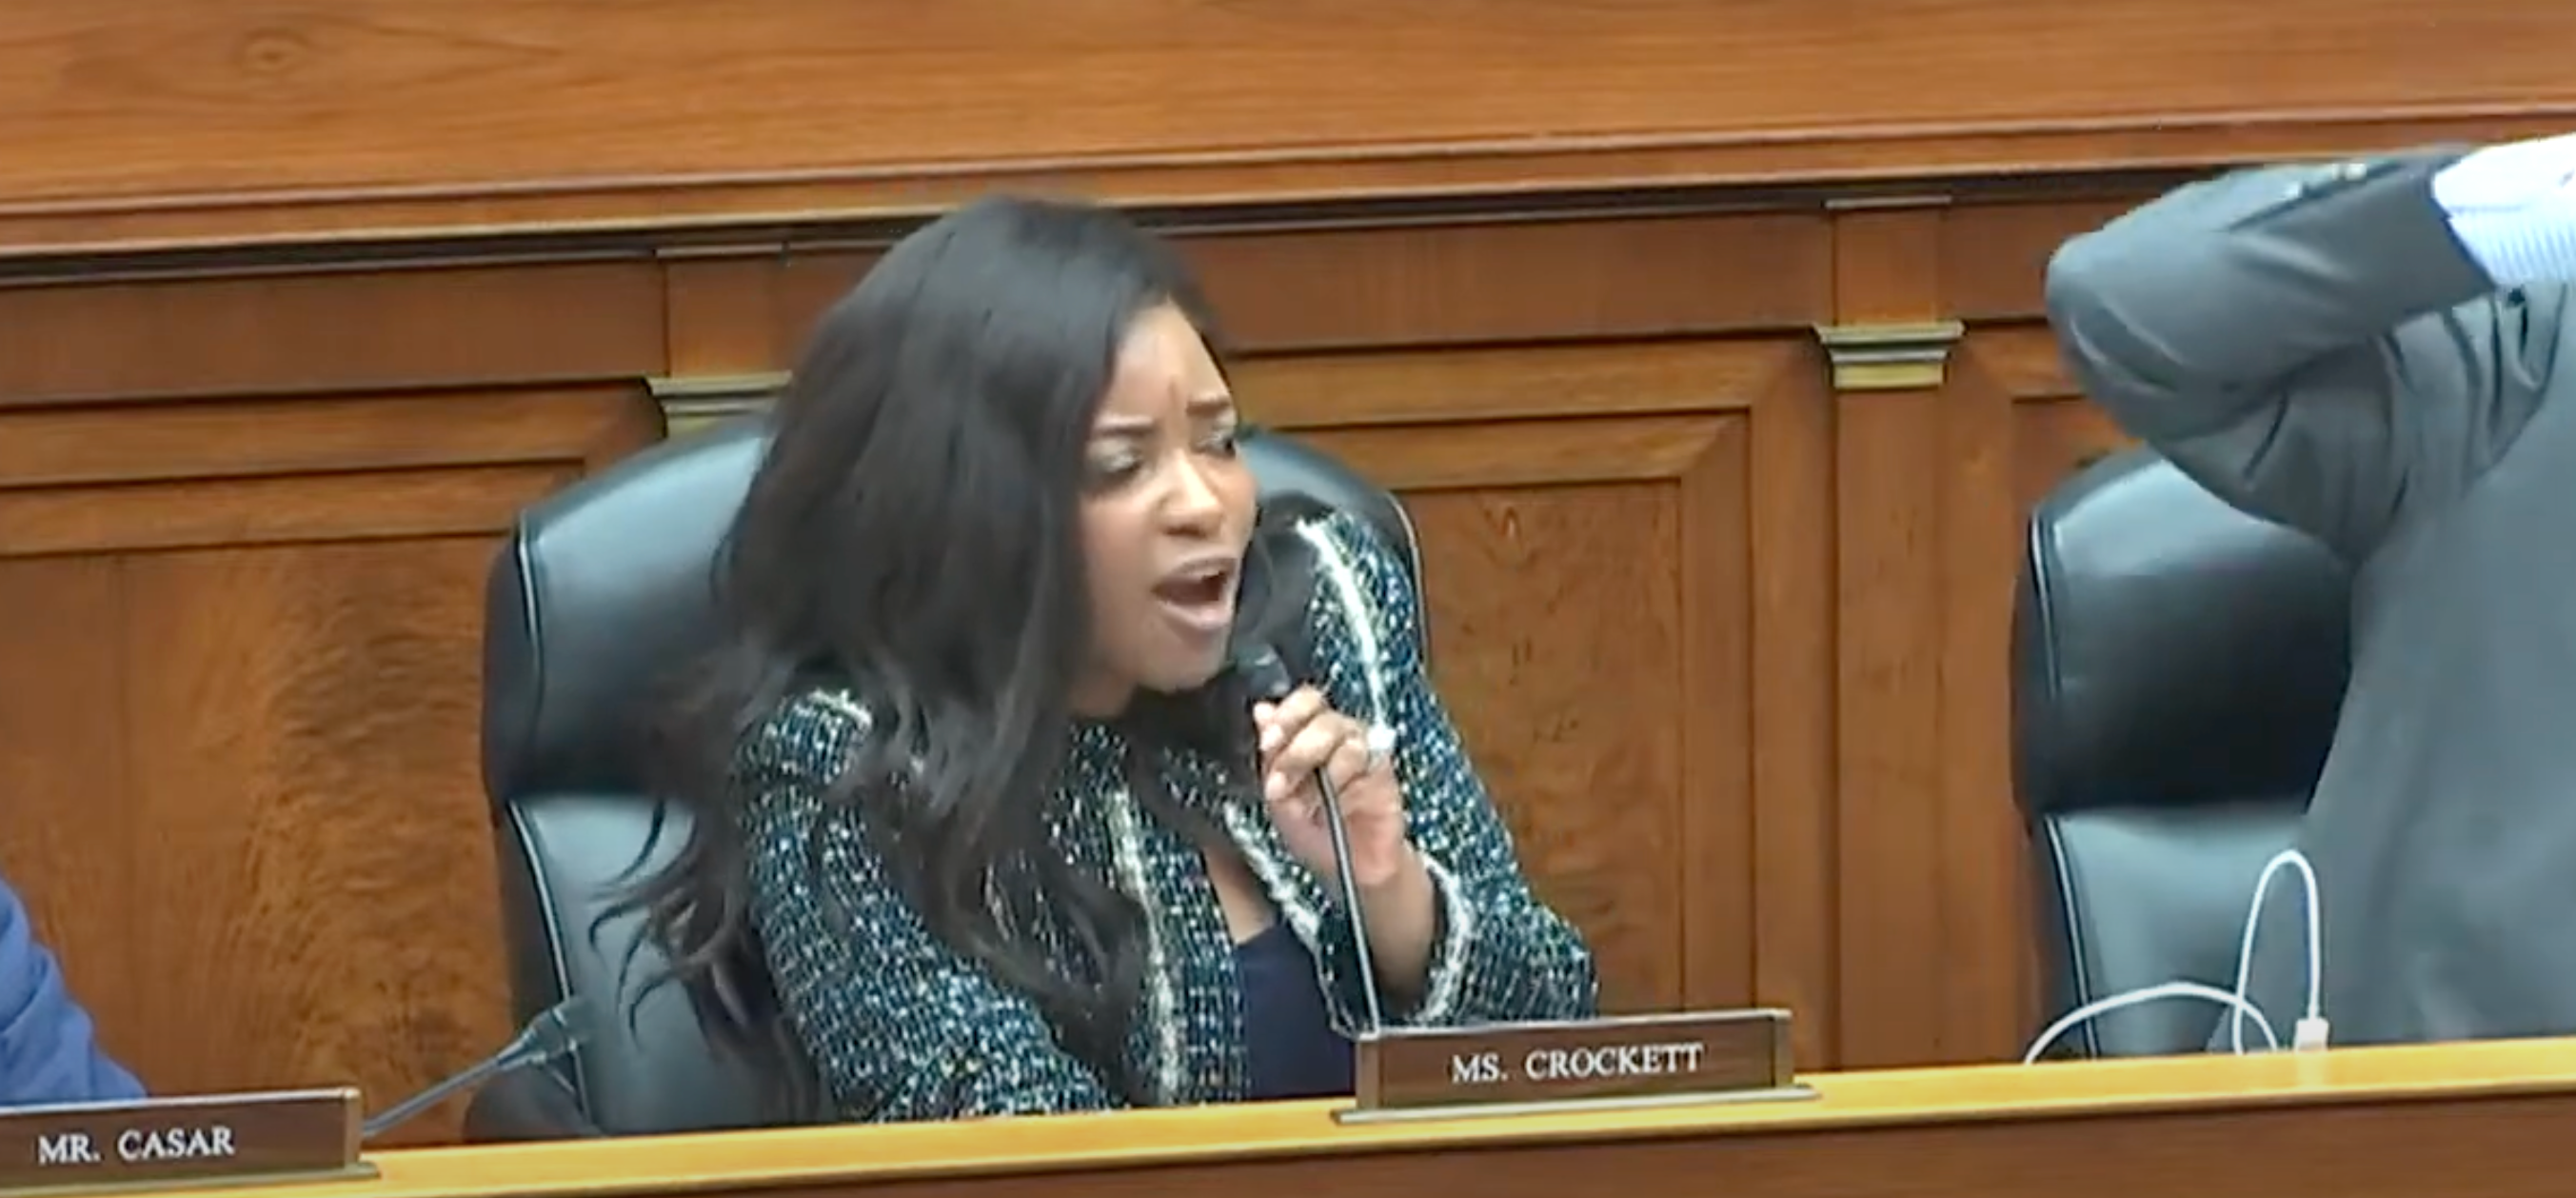 Representative Jasmine Crockett (D-Texas), criticises Reprentative Marjorie Taylor Greene, calling her a “bleach blonde bad-built butch body” during a hearing of the House Oversight Committee